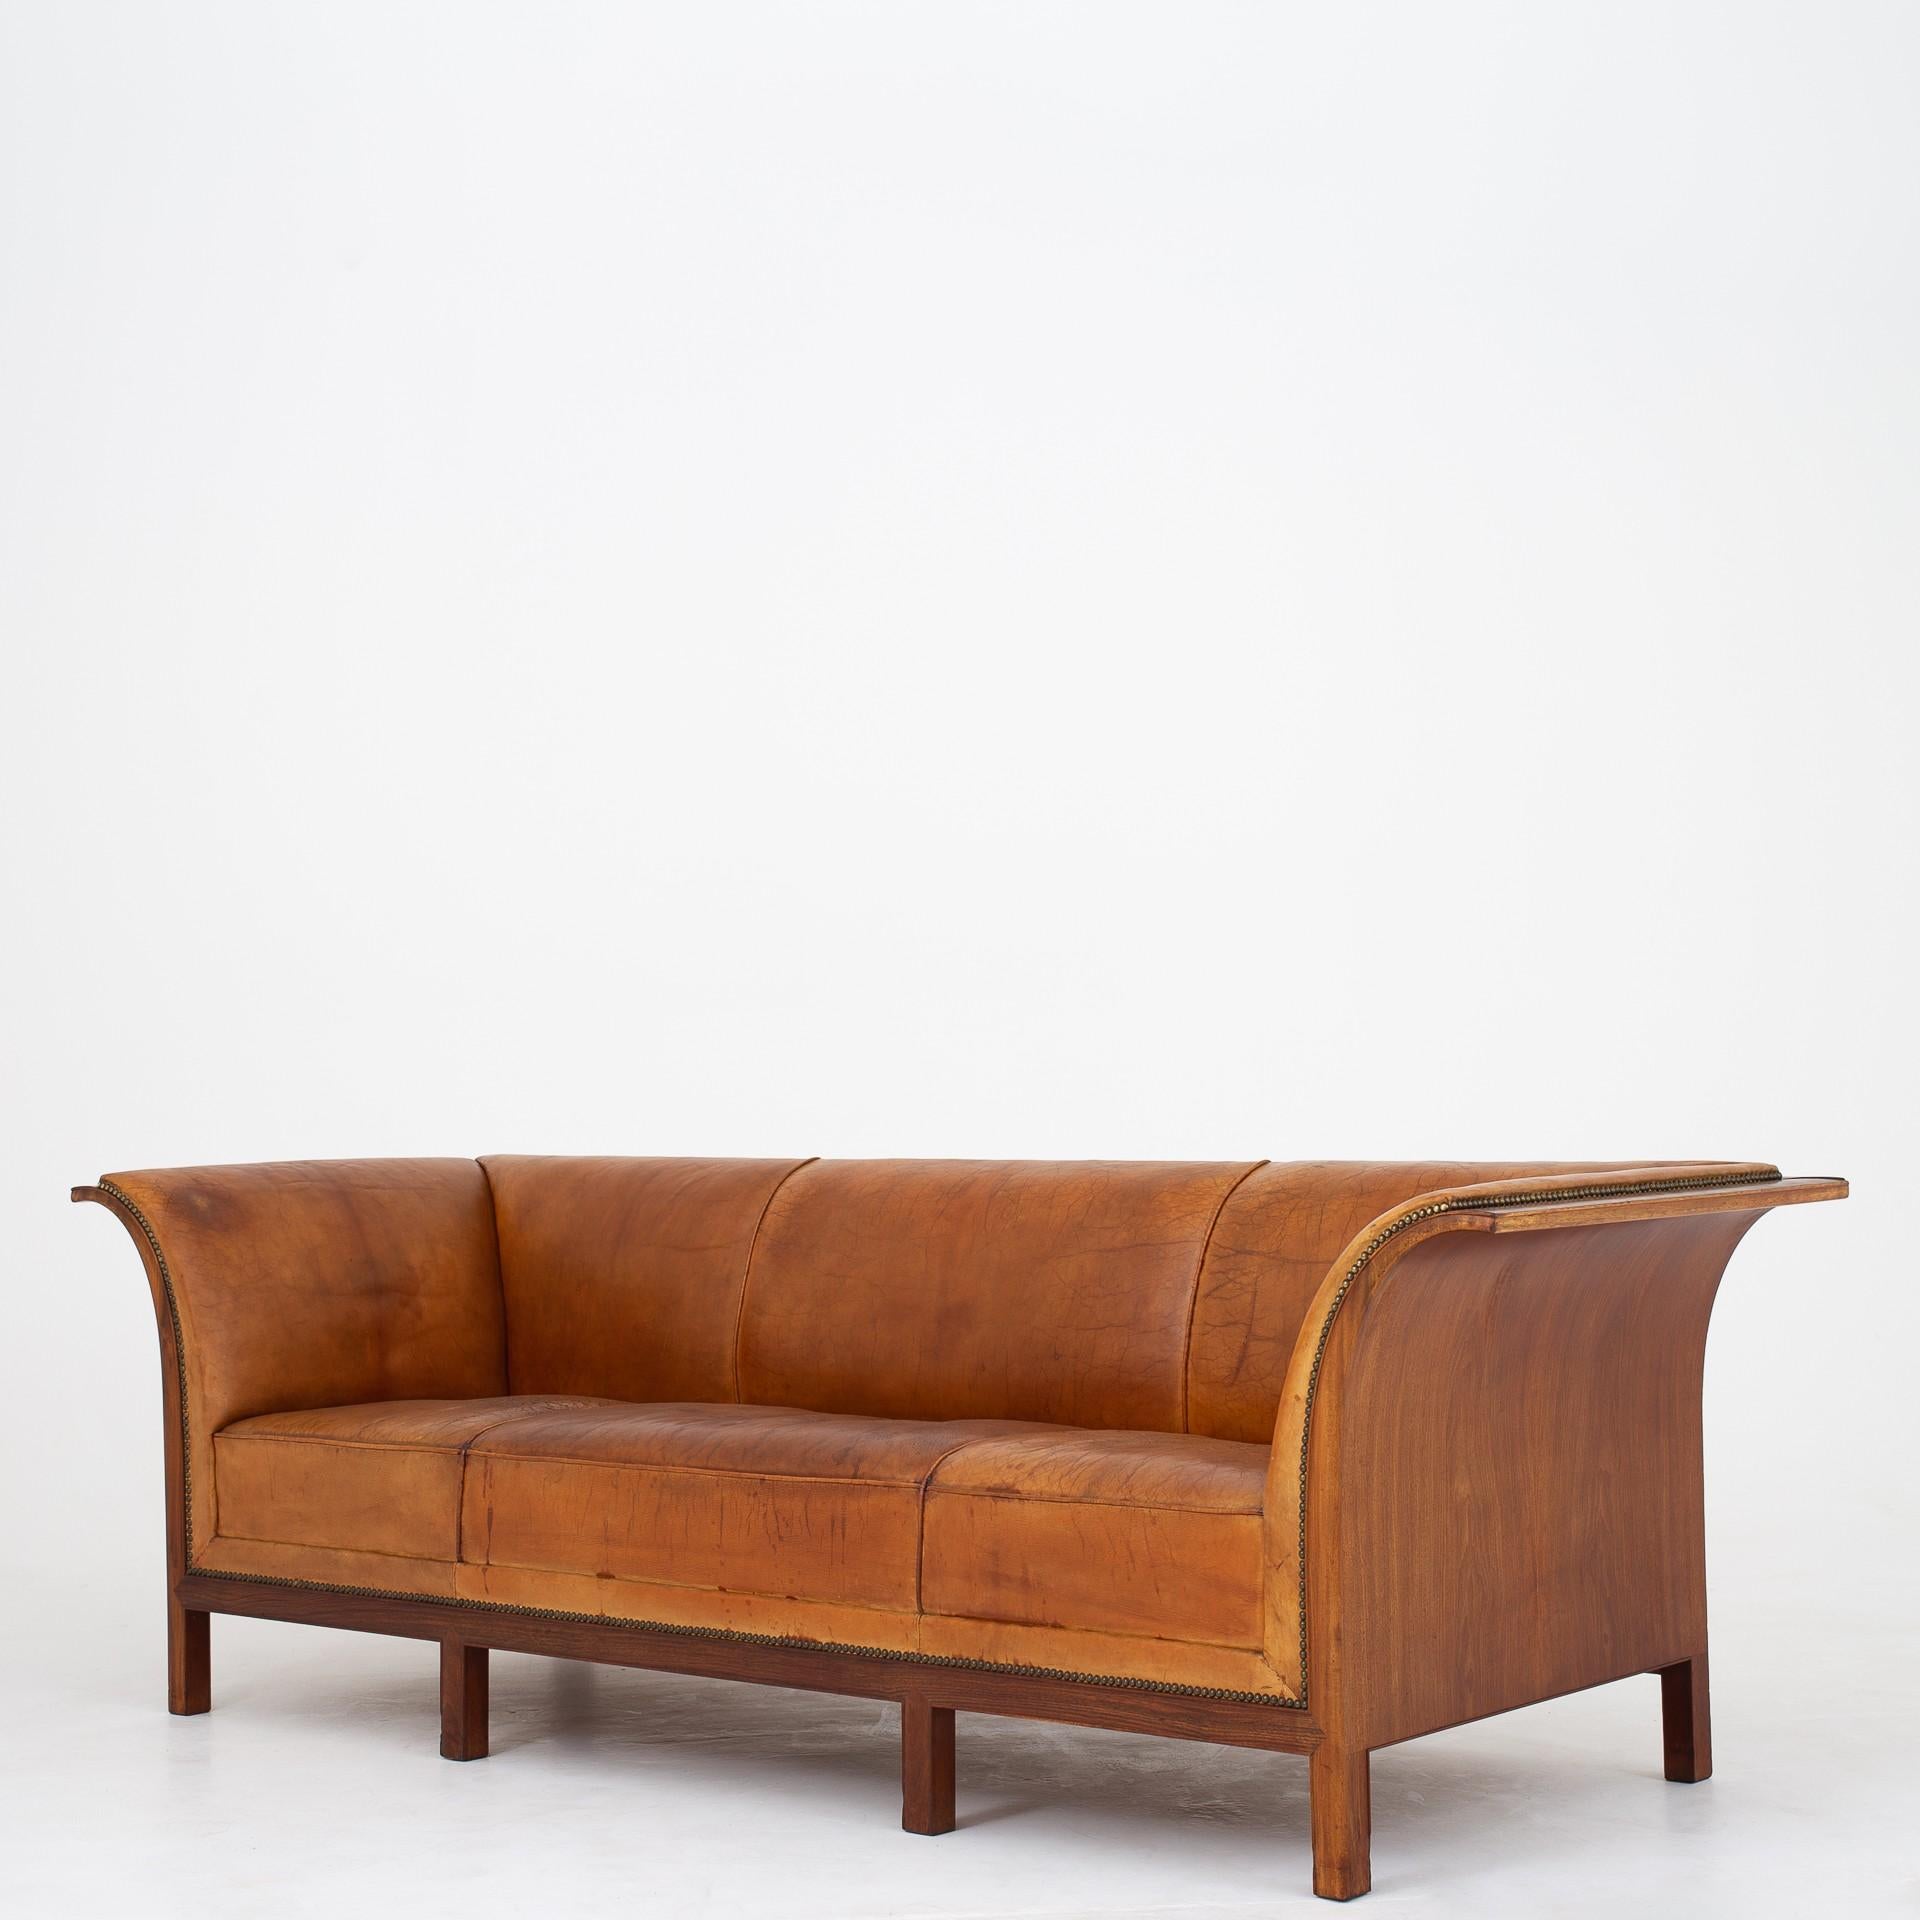 Sofa in patinated niger skin with nail clipped brass nails on cuban mahogany frame. Design 1938. Two chairs available. Maker Frits Henningsen.